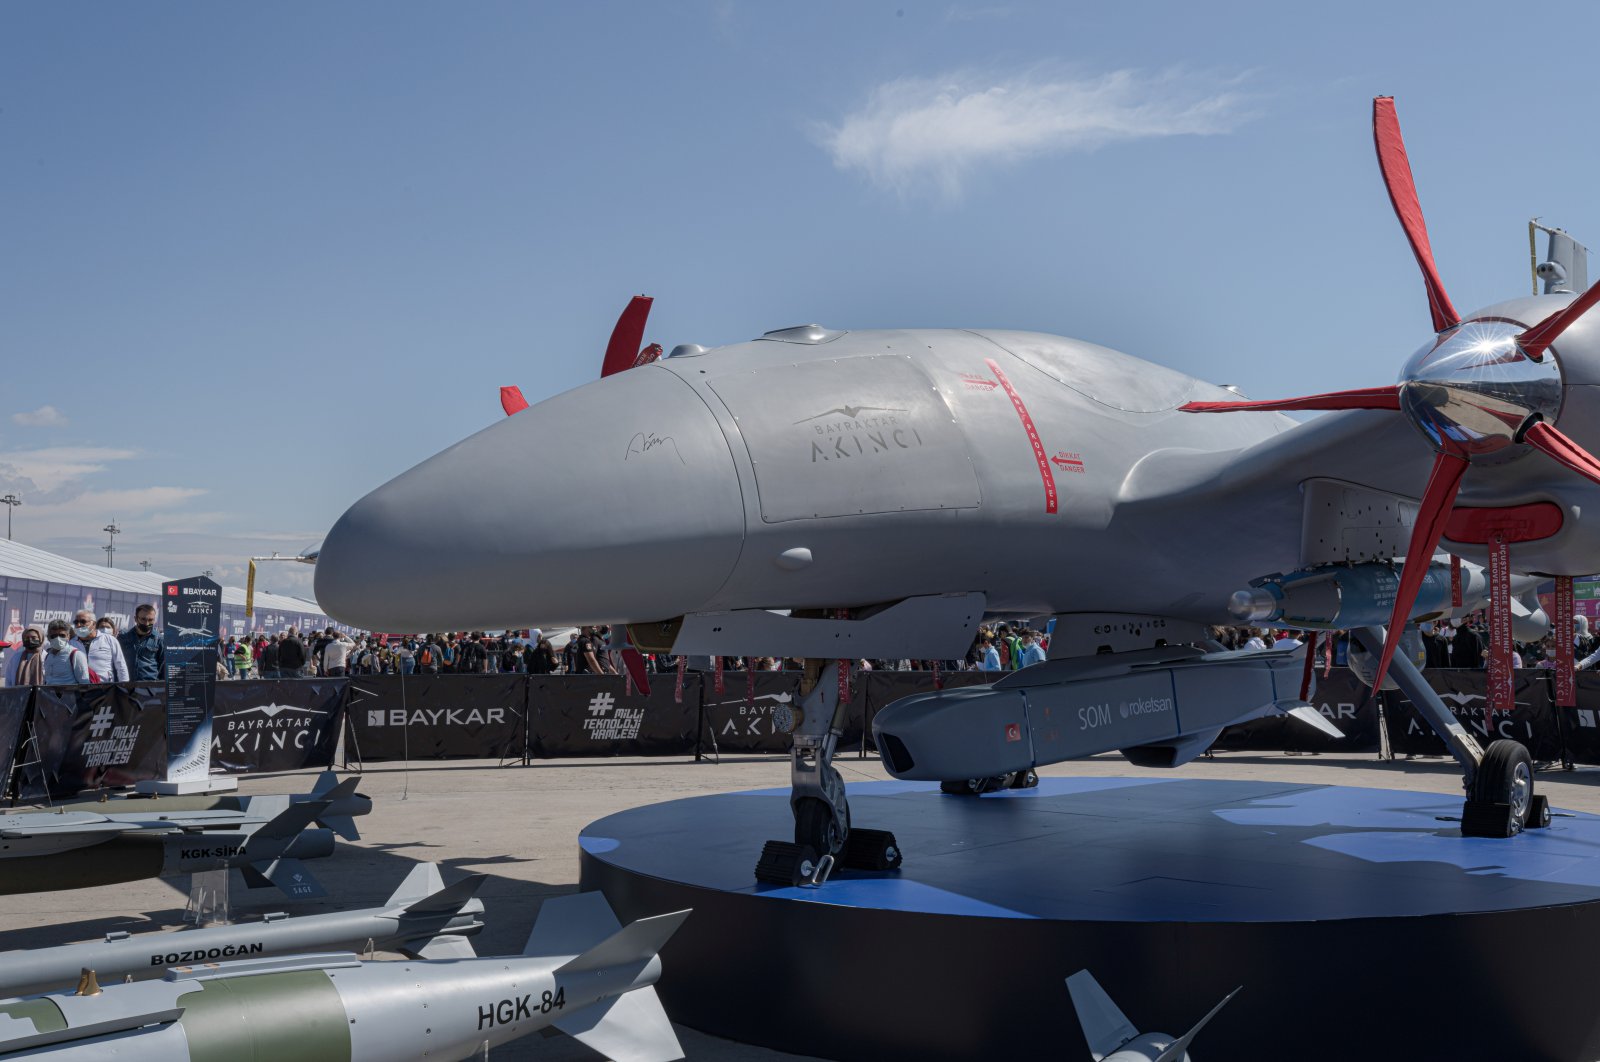 An Akıncı drone manufactured by the Turkish technology company Baykar is on display during the major aerospace and technology event Teknofest, Istanbul, Türkiye, Sept. 24, 2021. (Reuters Photo)